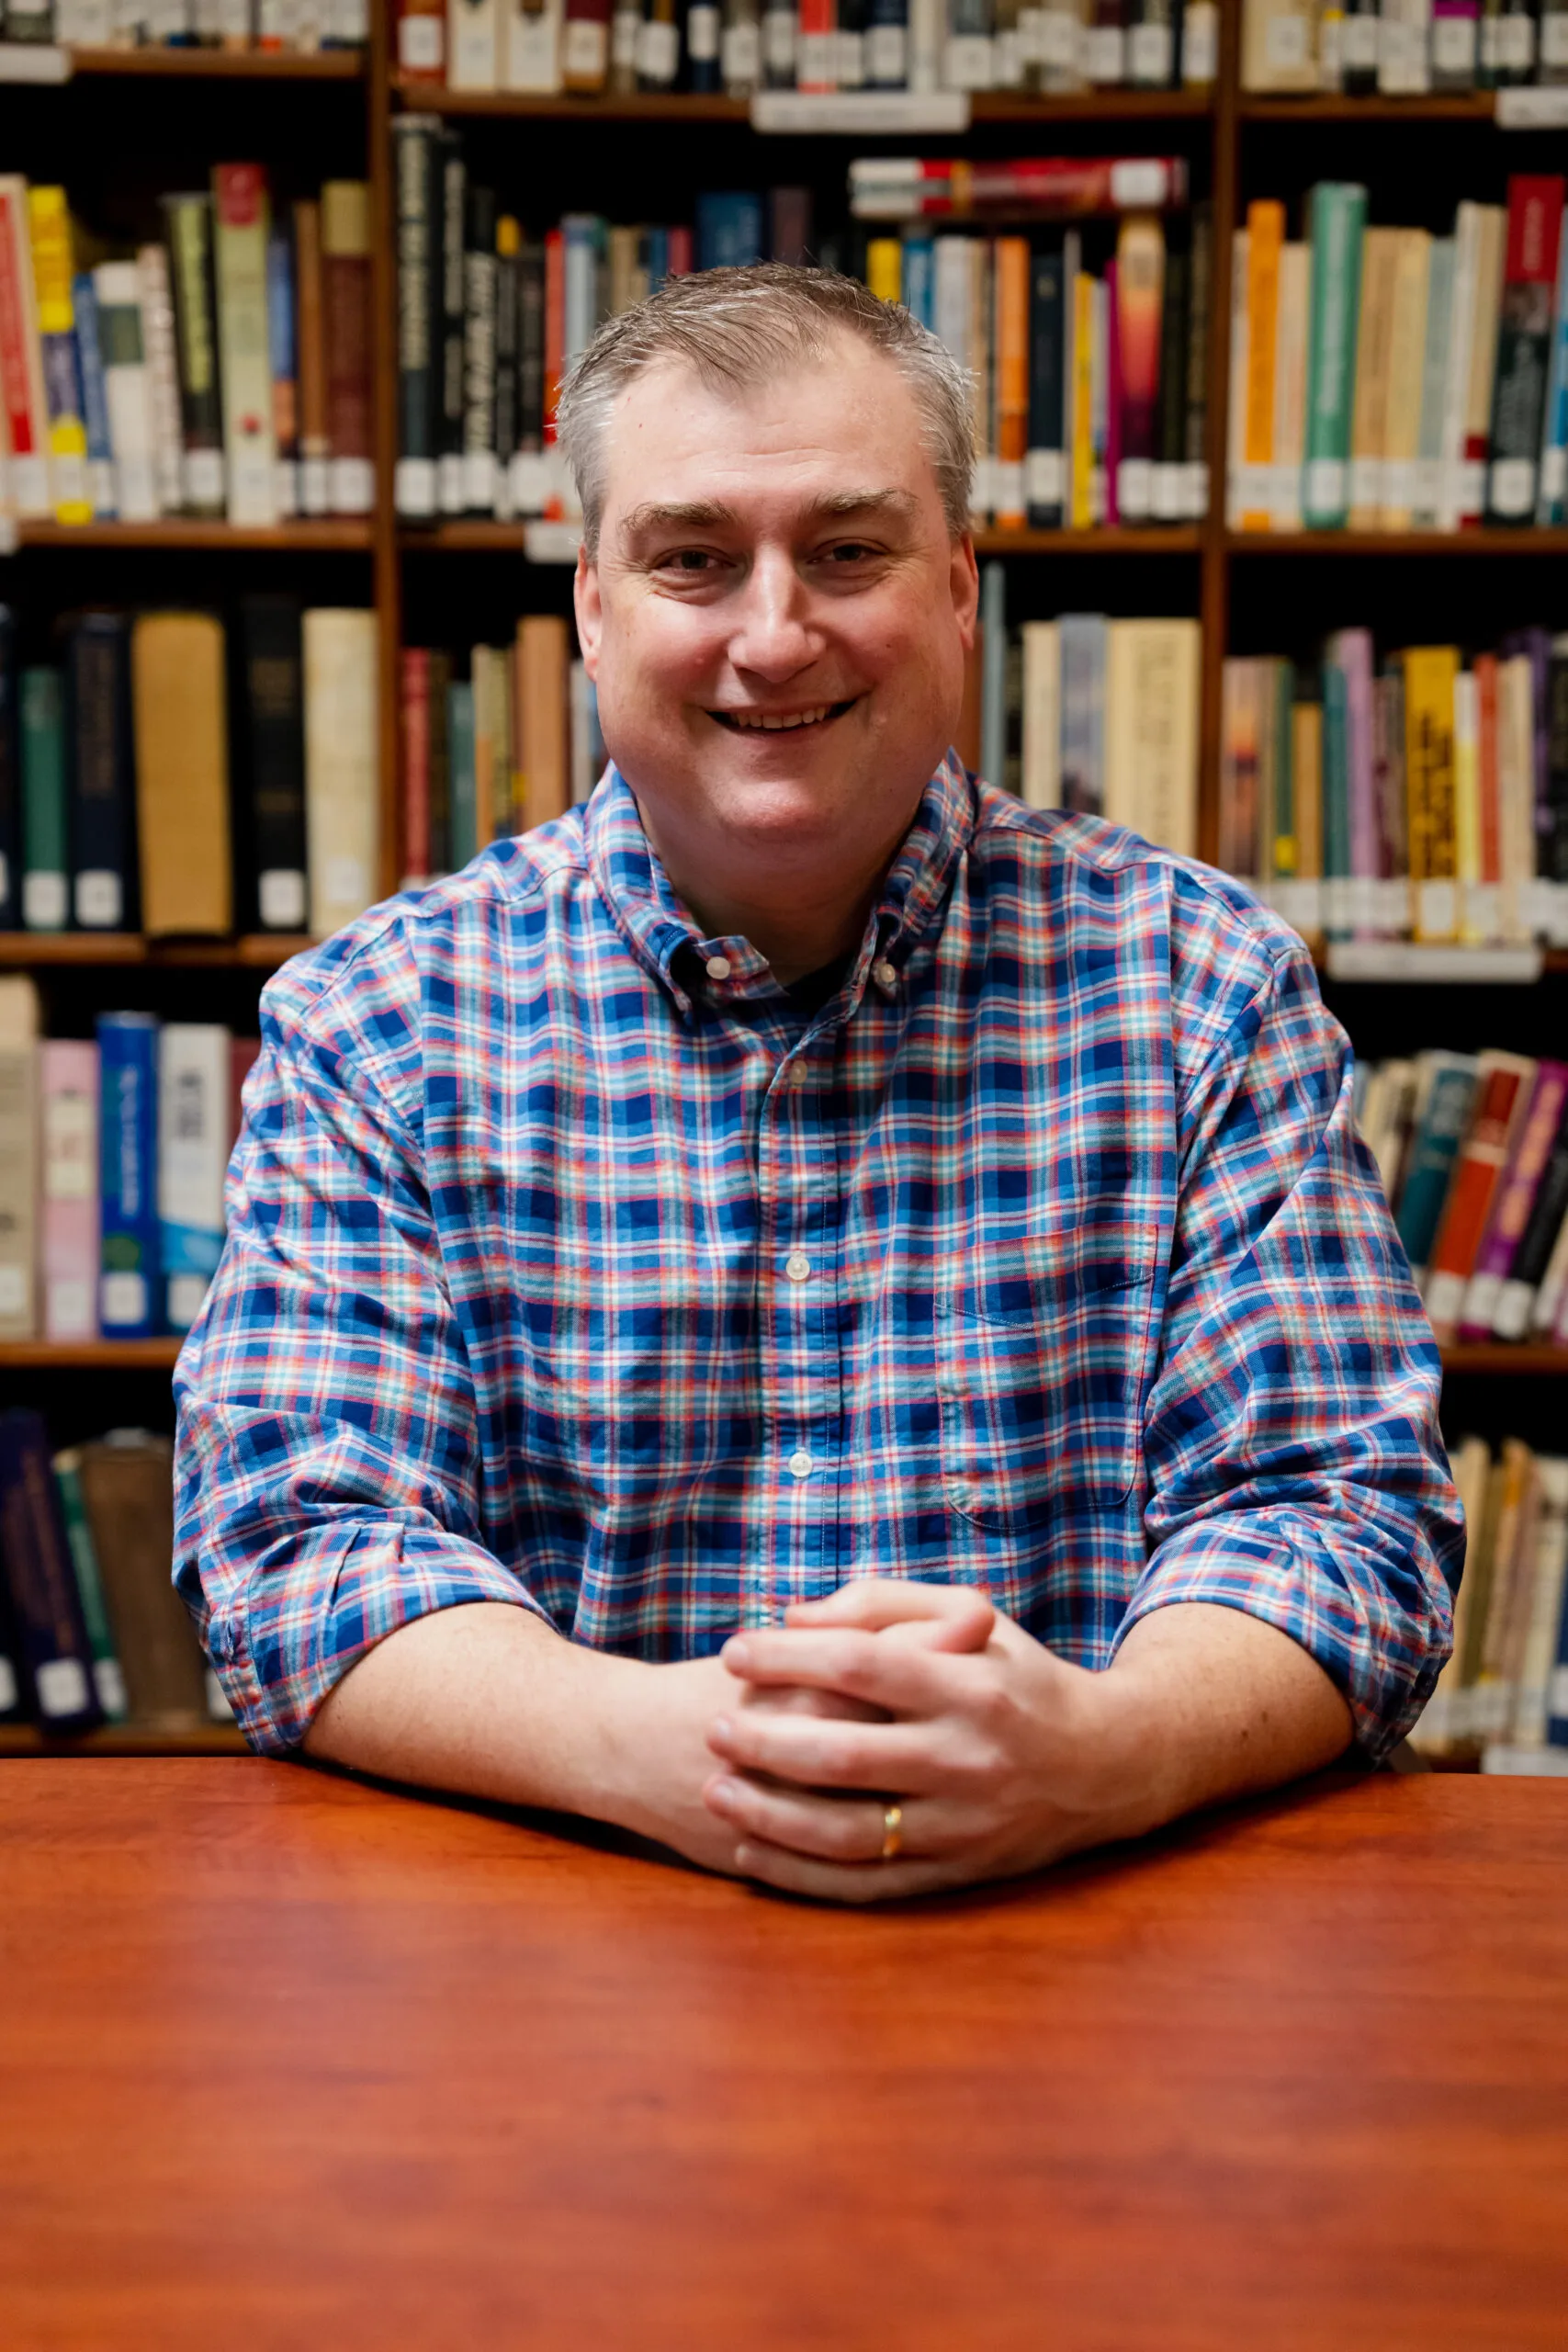 Rev. Aaron Meadows has been the head pastor at University Church for over 10 years. He is originally from North Canton, Ohio and studied at Pittsburgh Theological Seminary in Pittsburgh.